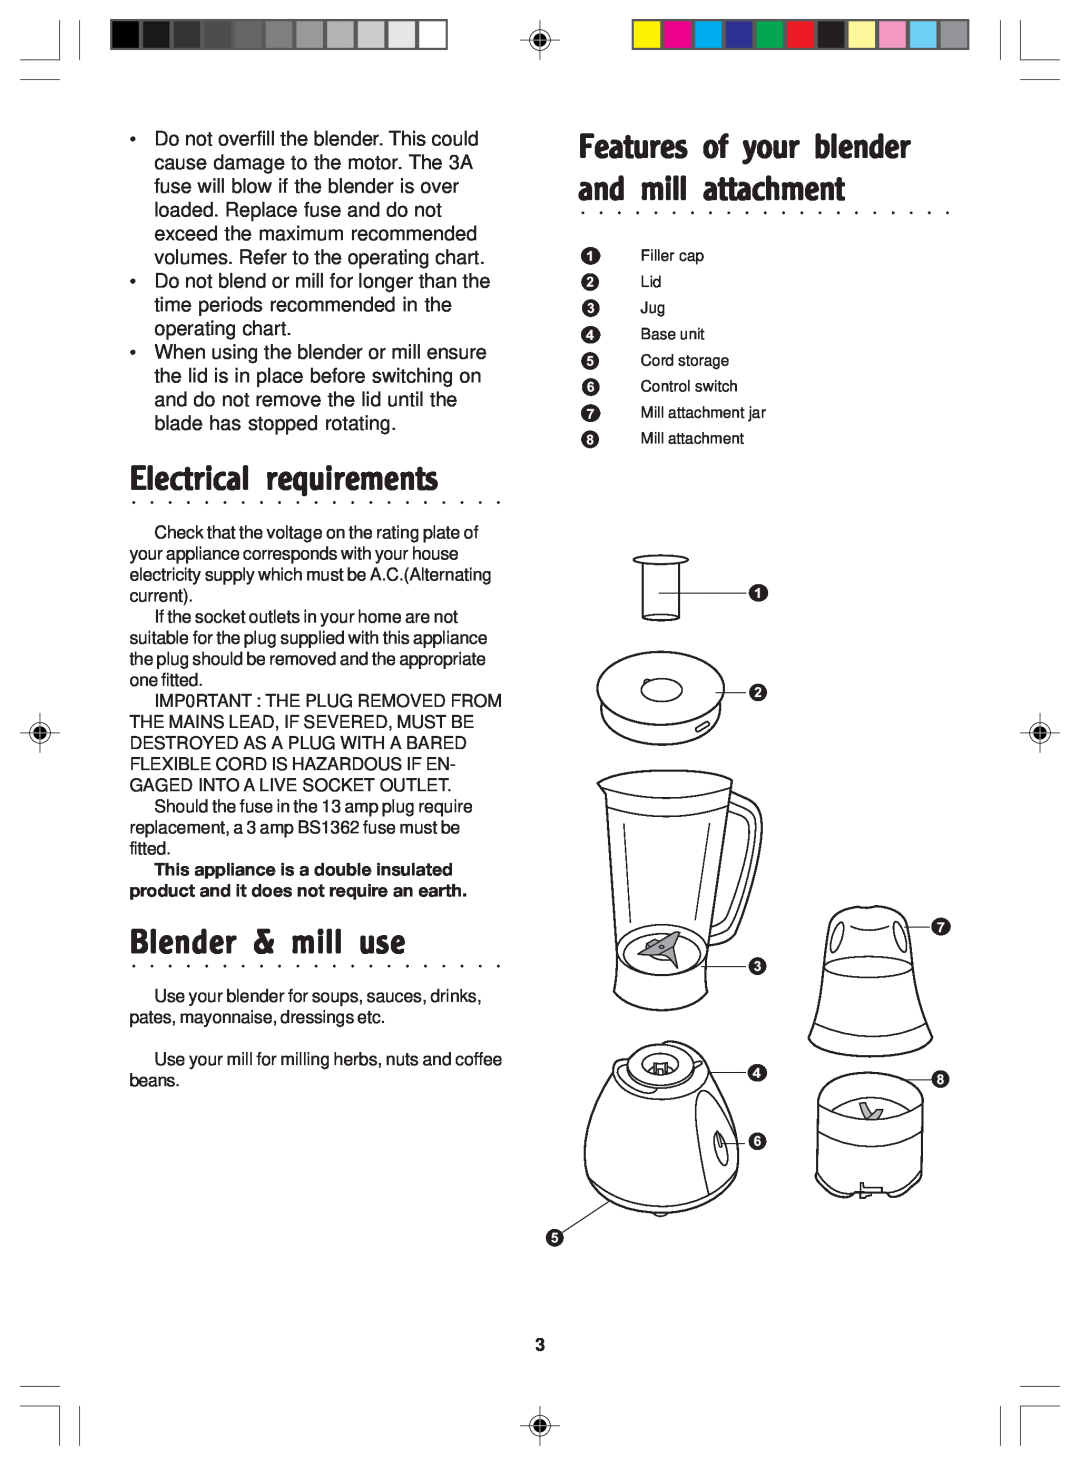 Morphy Richards manual Electrical requirements, Blender & mill use, Features of your blender and mill attachment 